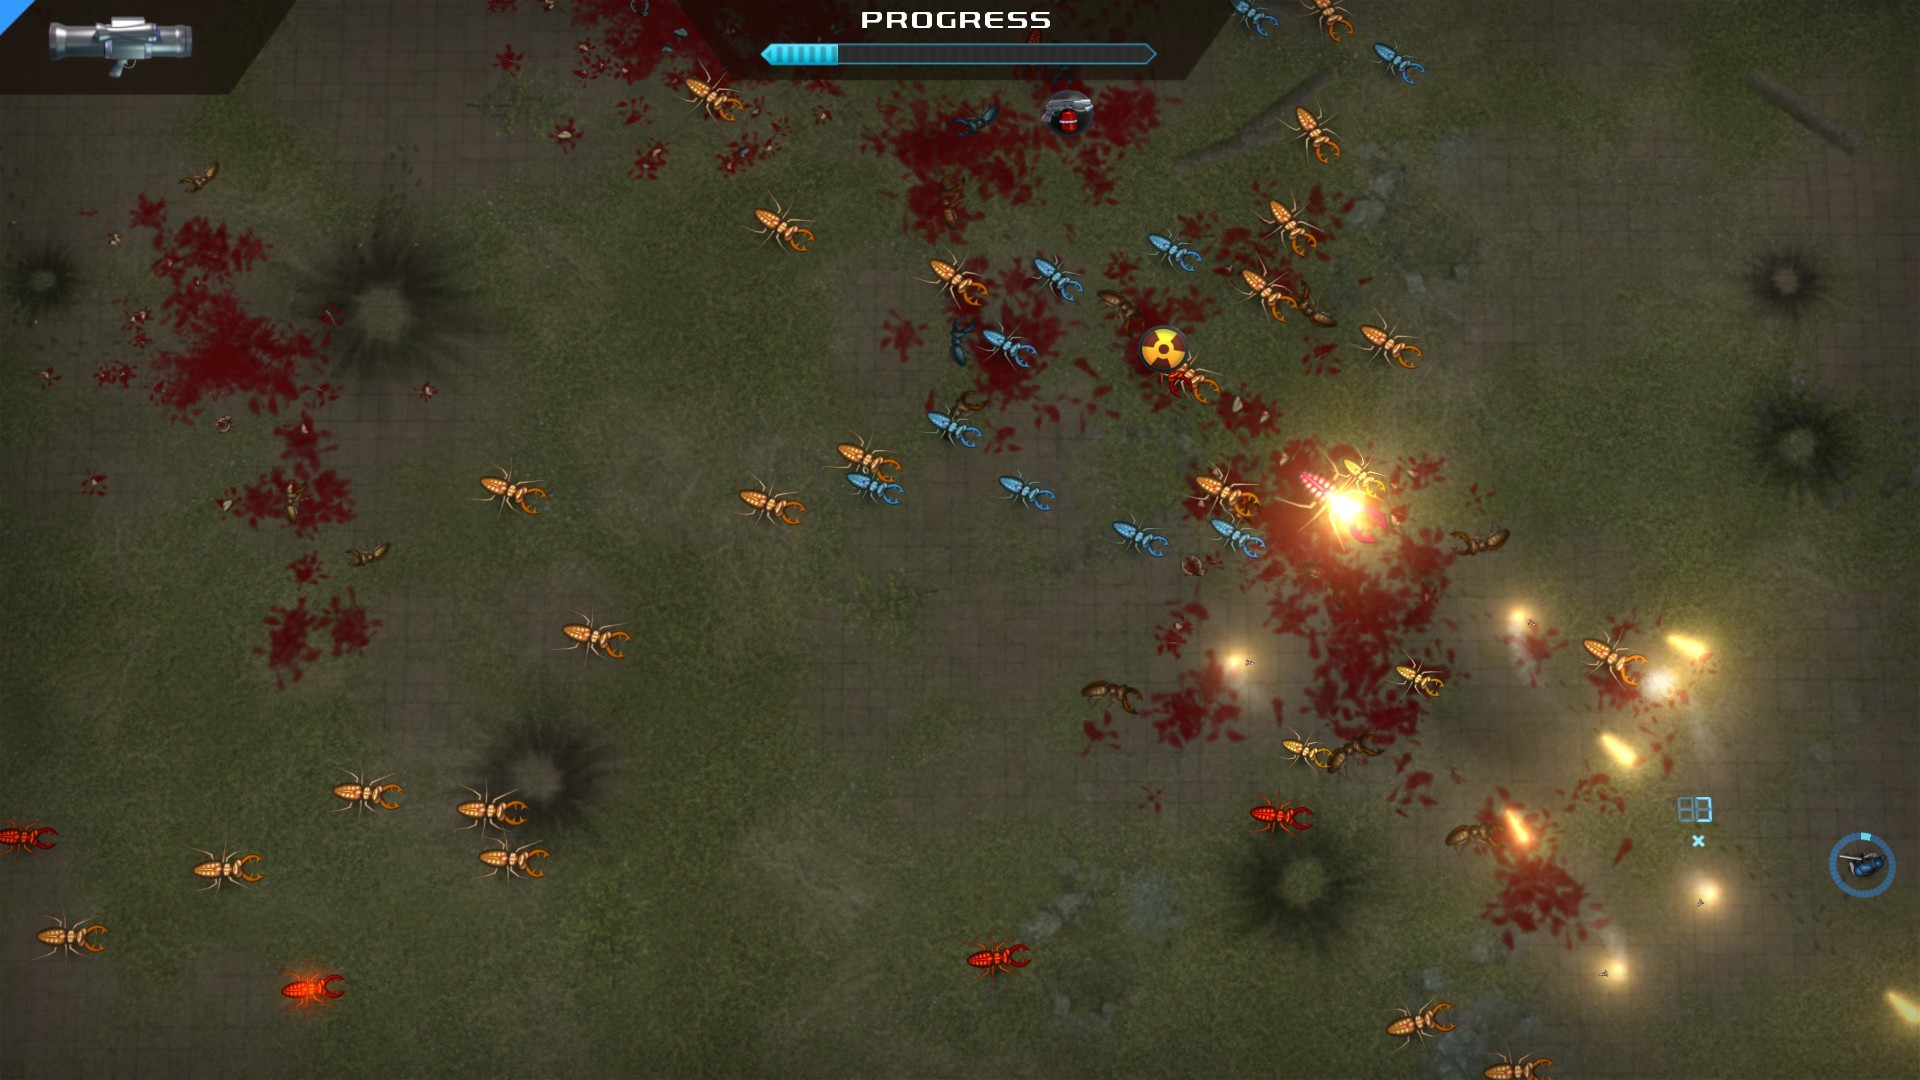 Crimsonland Top-Down Shooter Resurrected and Ported for Linux 11 Years Later